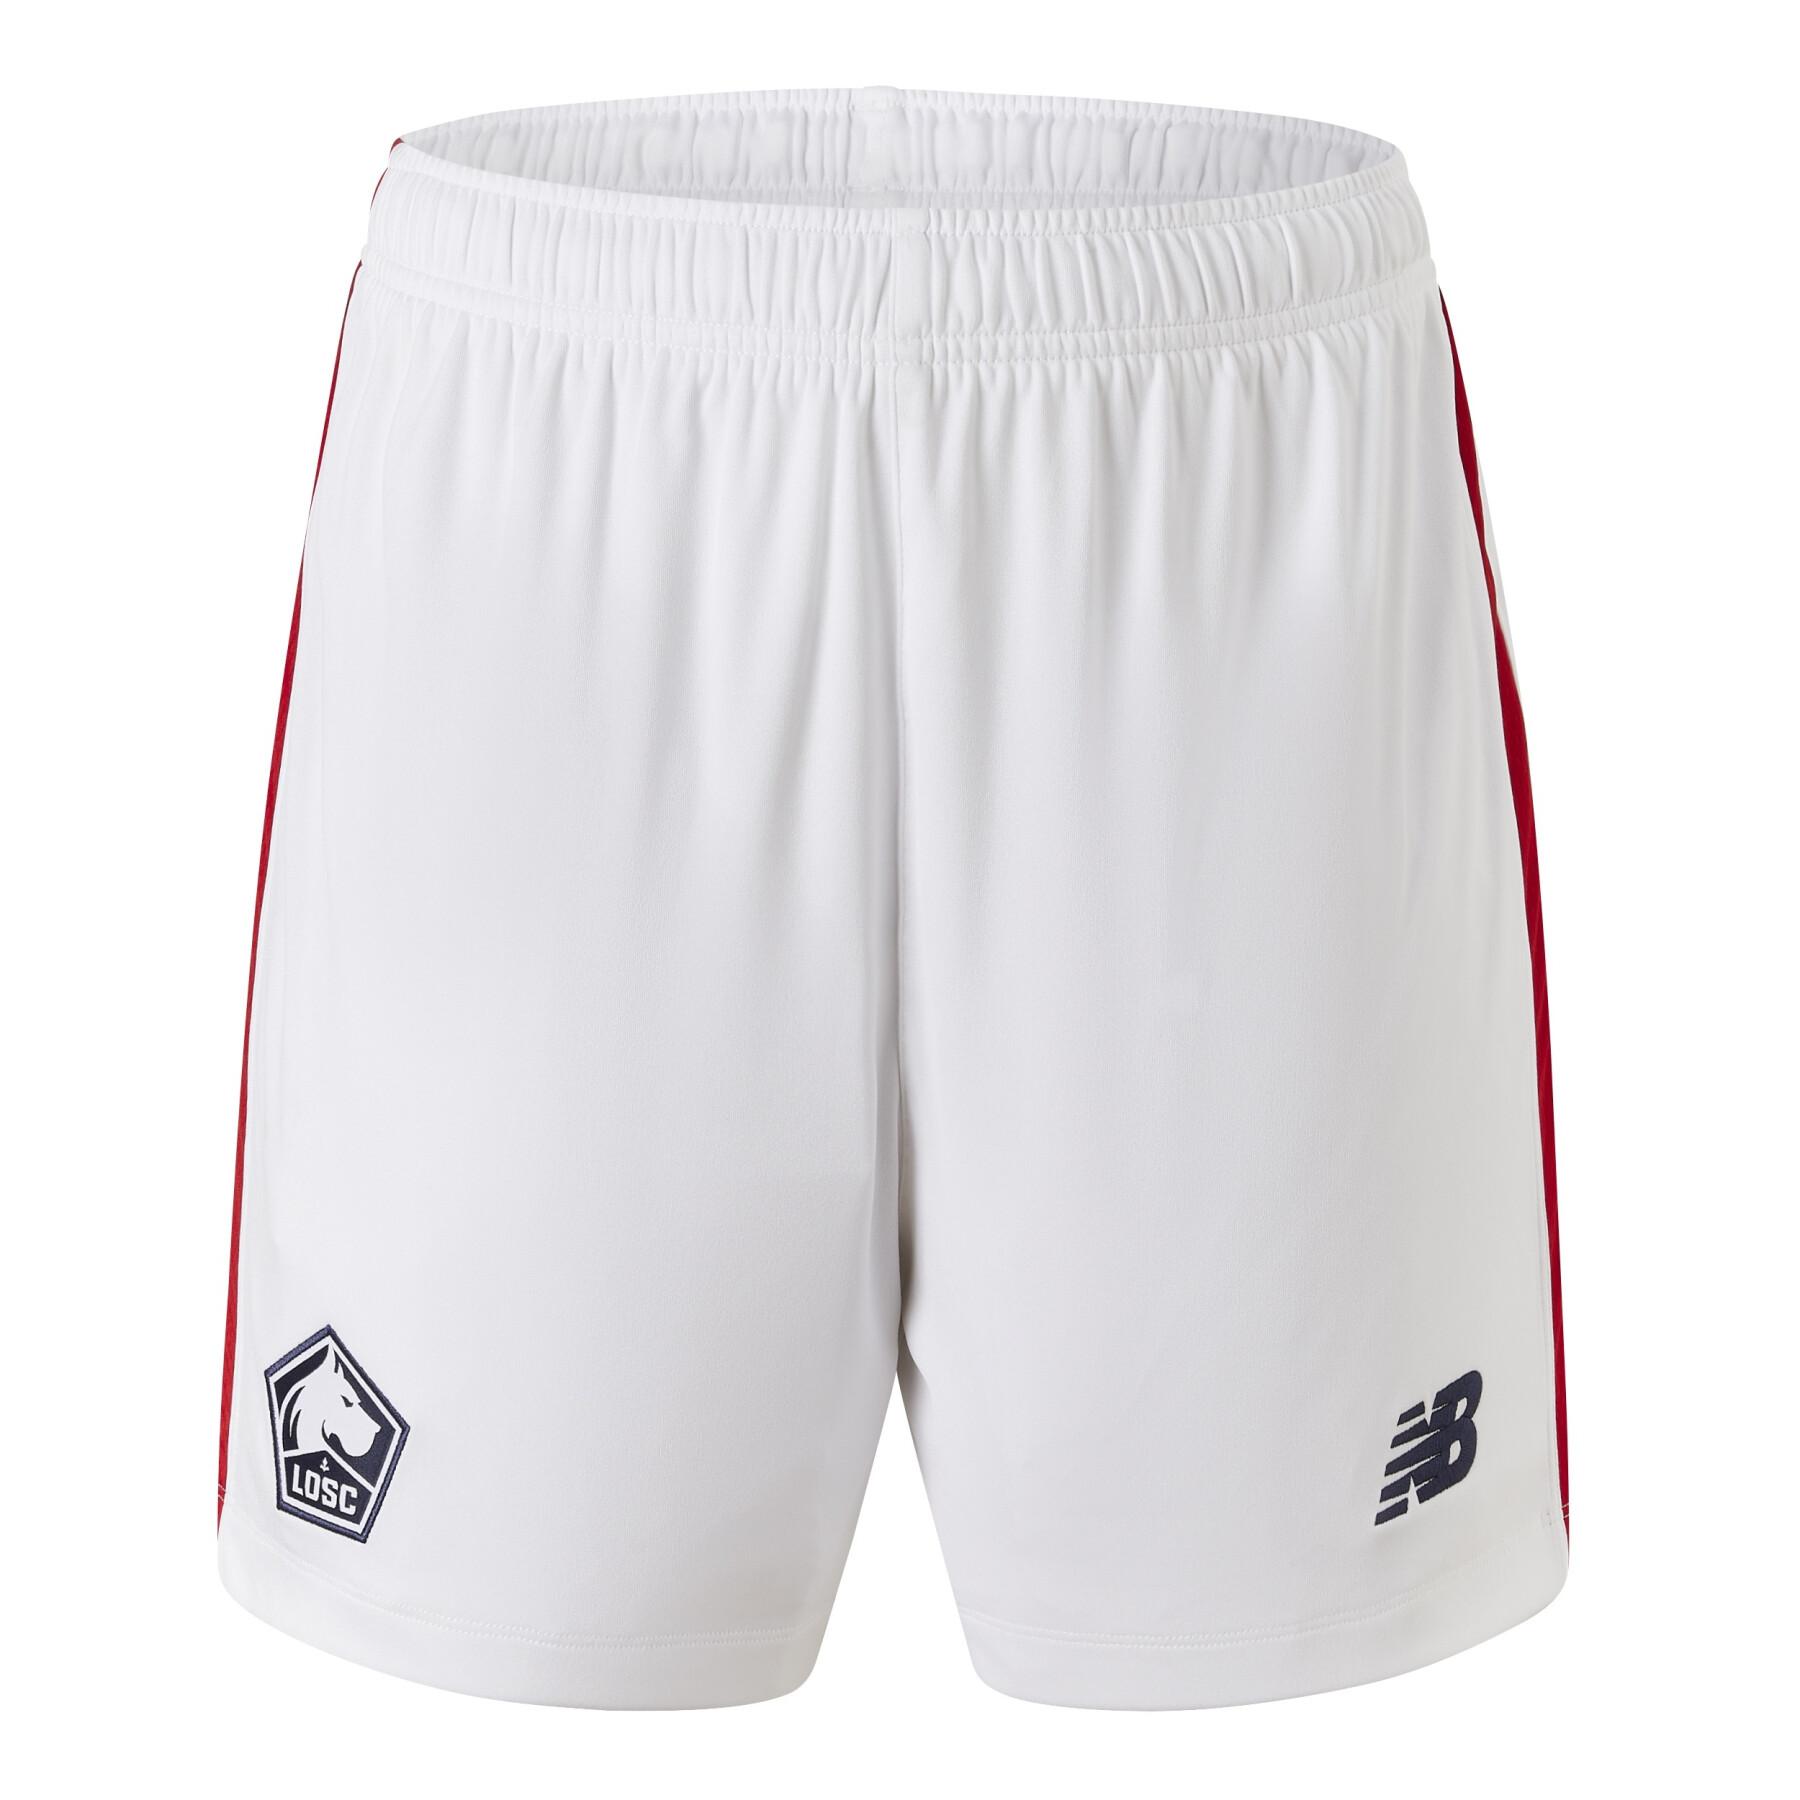 Outer shorts losc 2022/23